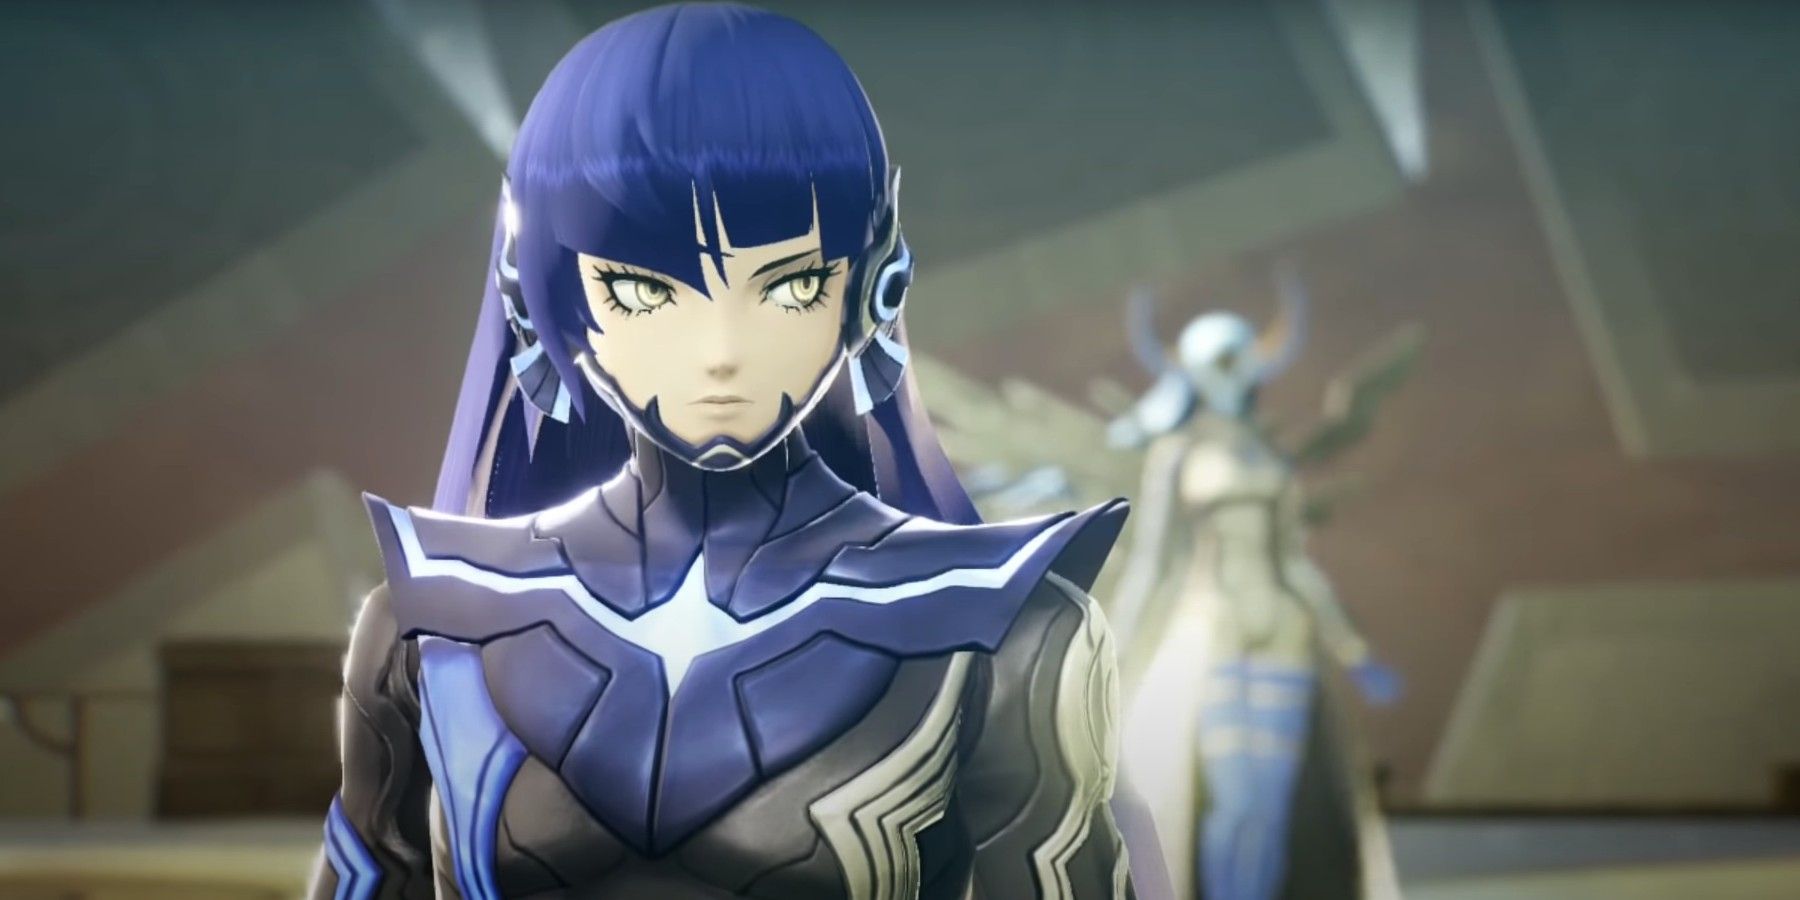 Shin Megami Tensei V multiplatform SE reveal after P5R launch and Switch 2  reveal? : r/Megaten